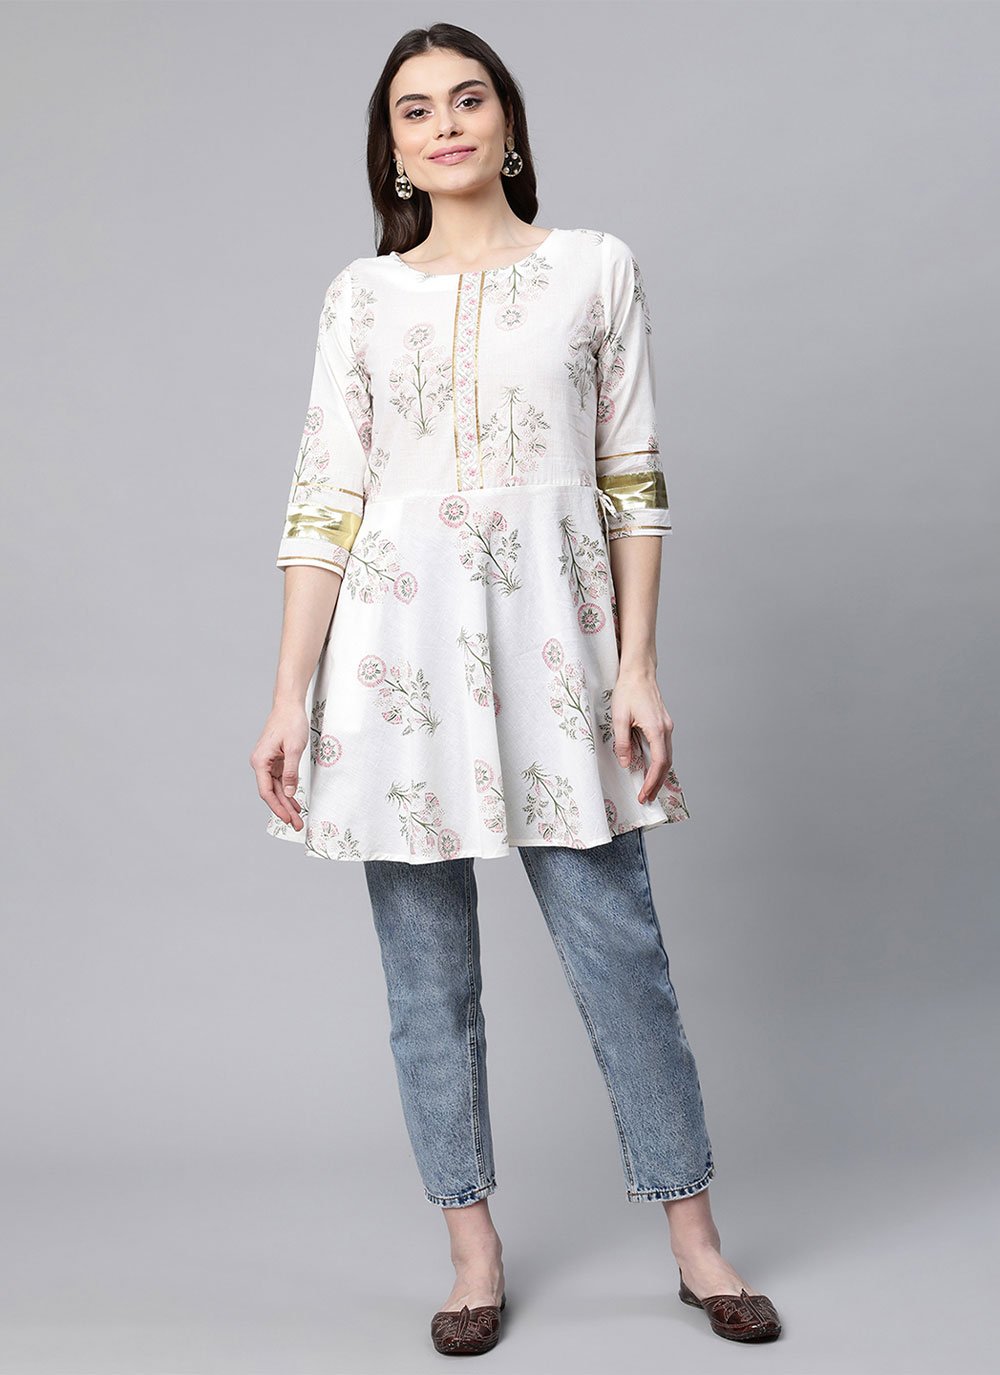 Buy White  Green Printed Satin Floral Kurti with Green Cotton Silk Pants  Kurti Set by Colorauction  Online shopping for Kurtis in India